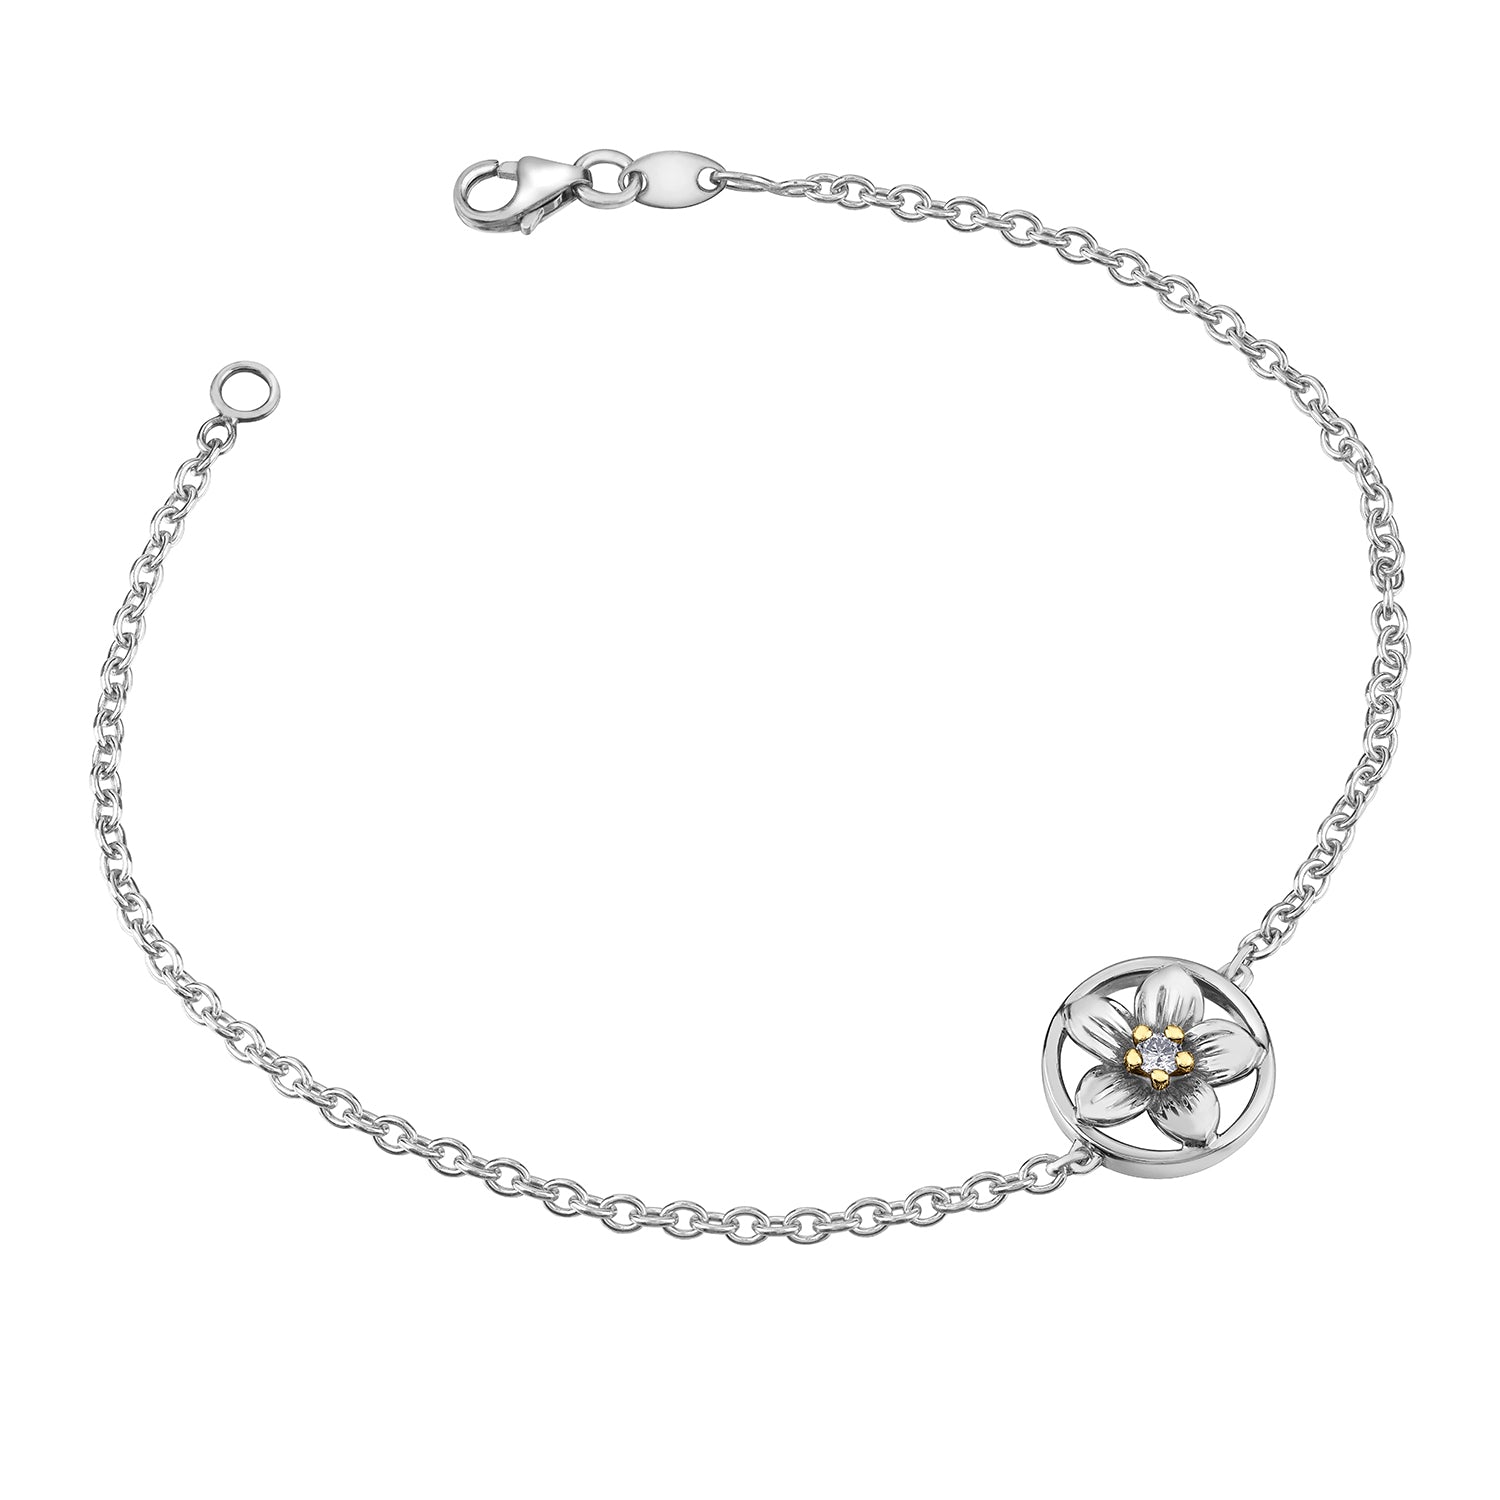 Crafted in 14KT yellow and white Certified Canadian Gold, this bracelet features a Nova Scotia mayflower set with a round brilliant-cut Canadian diamond